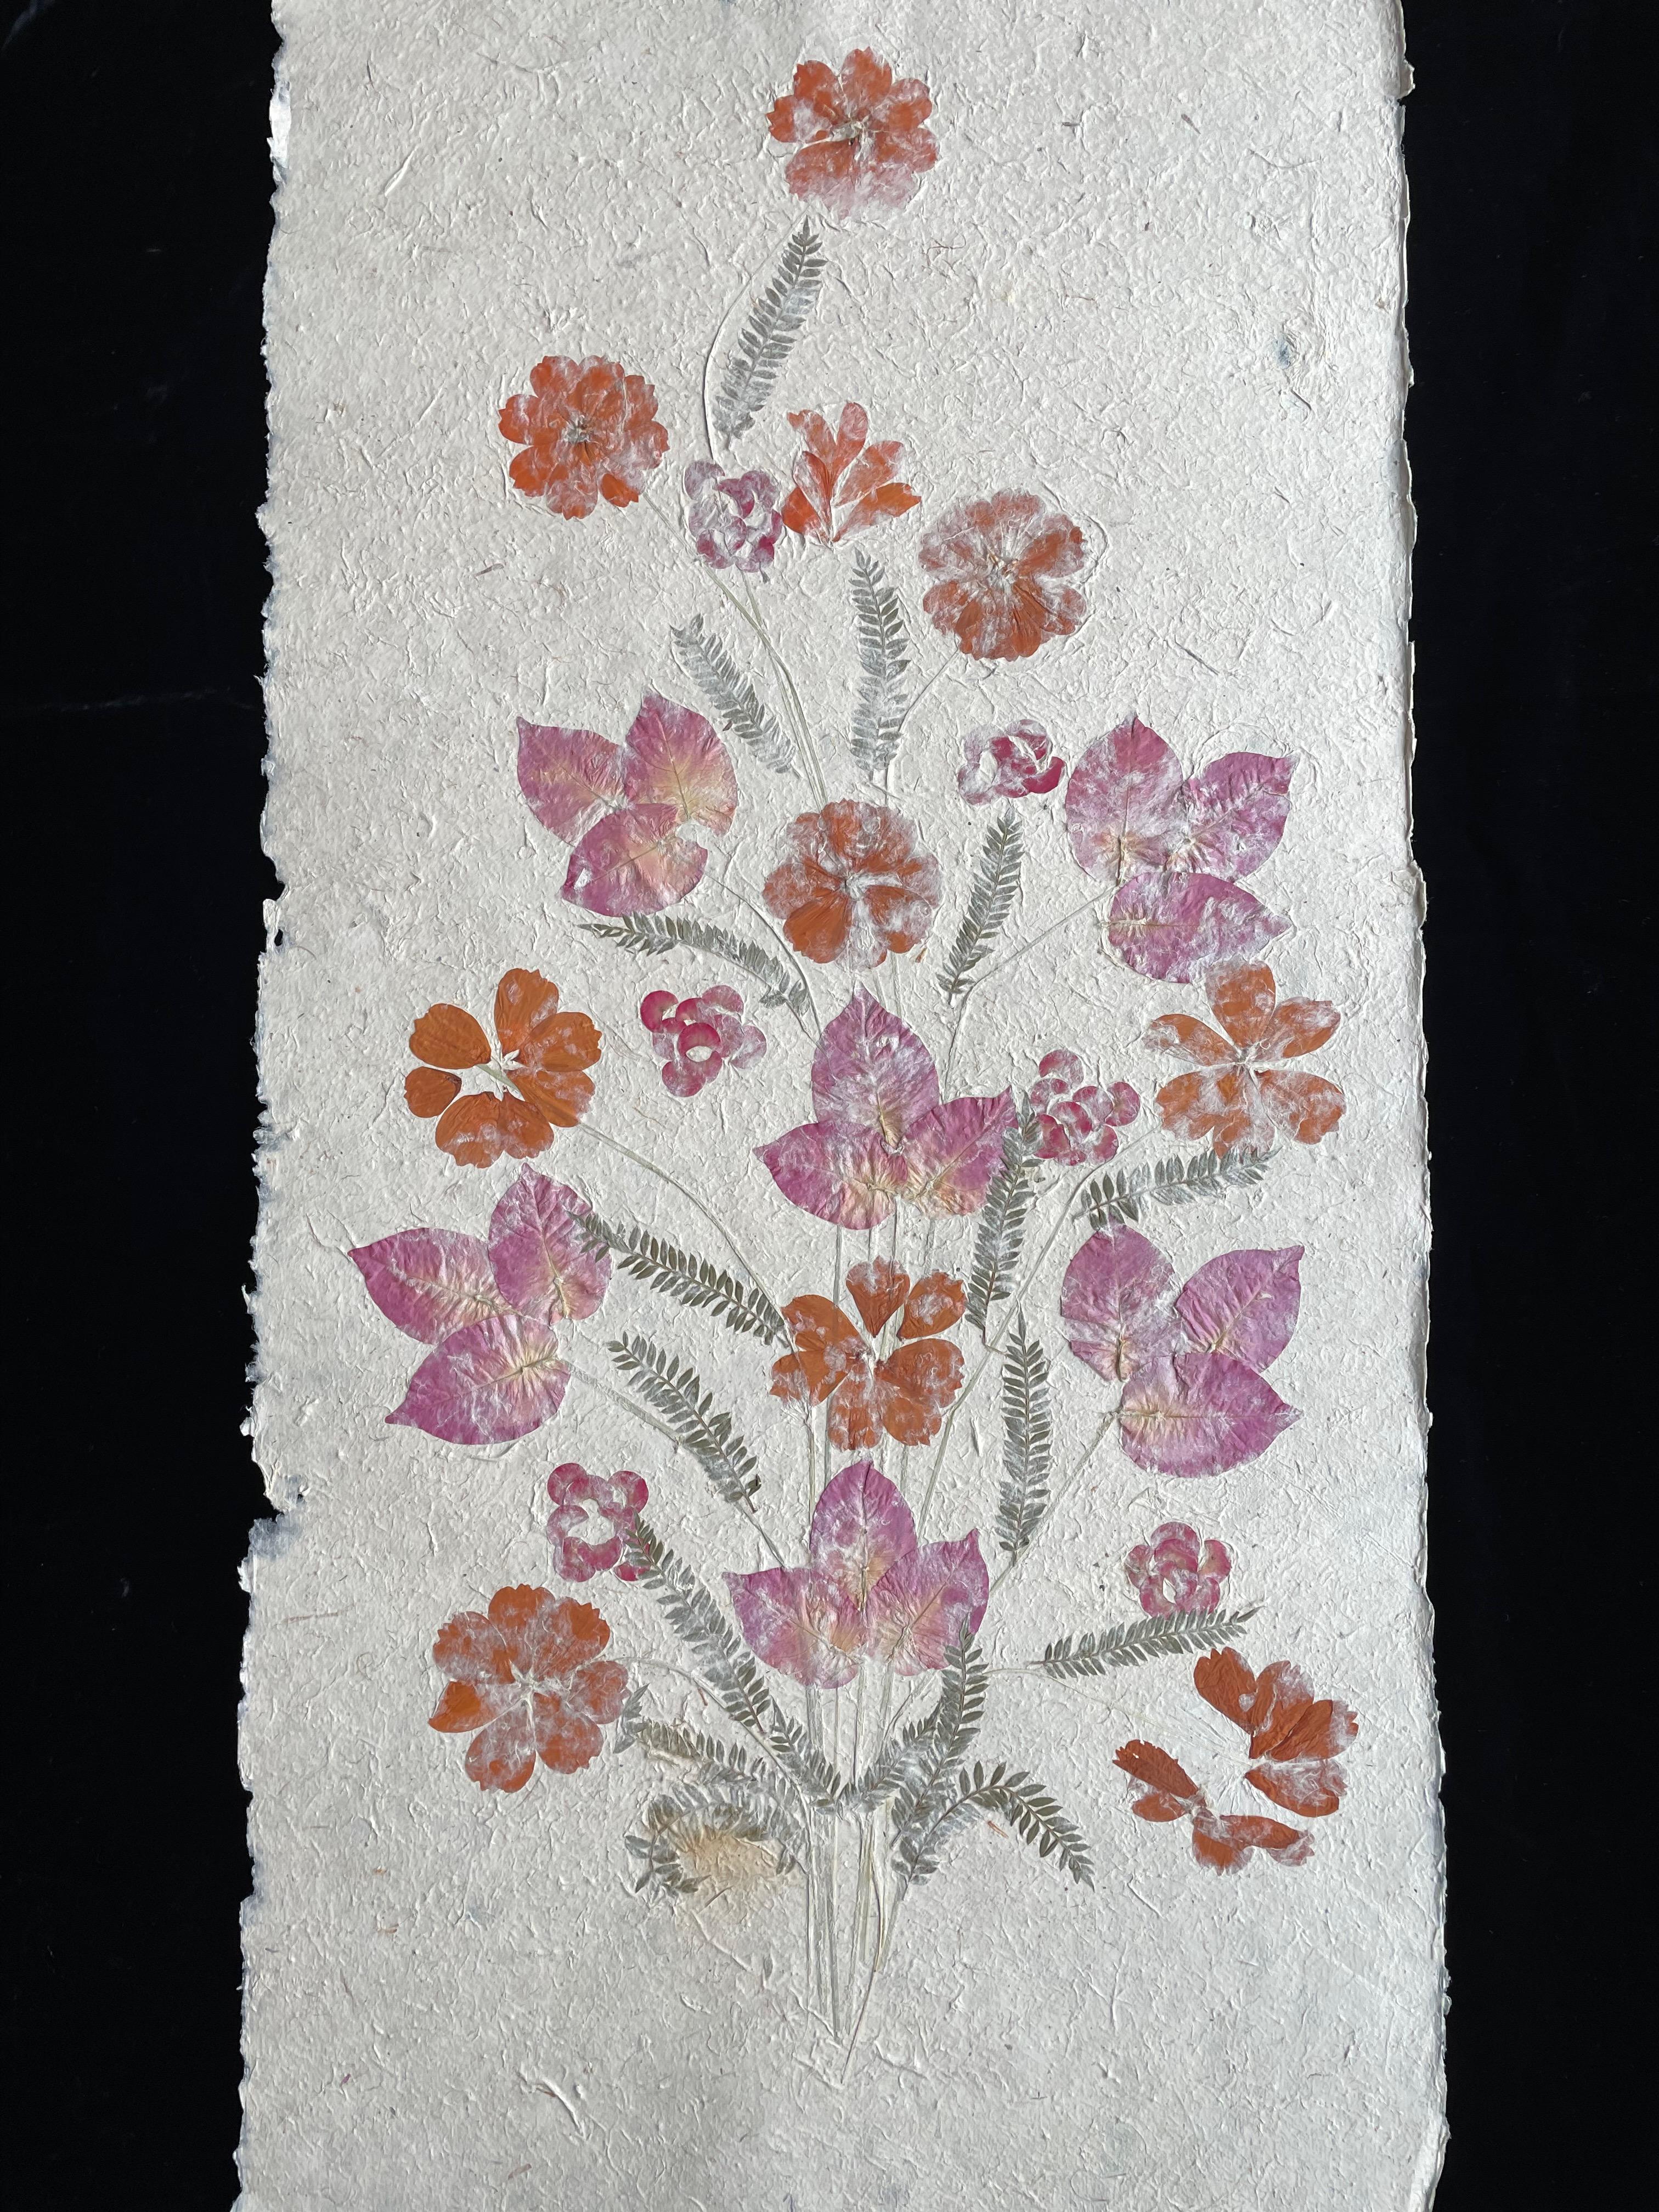 Madagascan Dried Flowers On Hand Made Paper - Art by Unknown